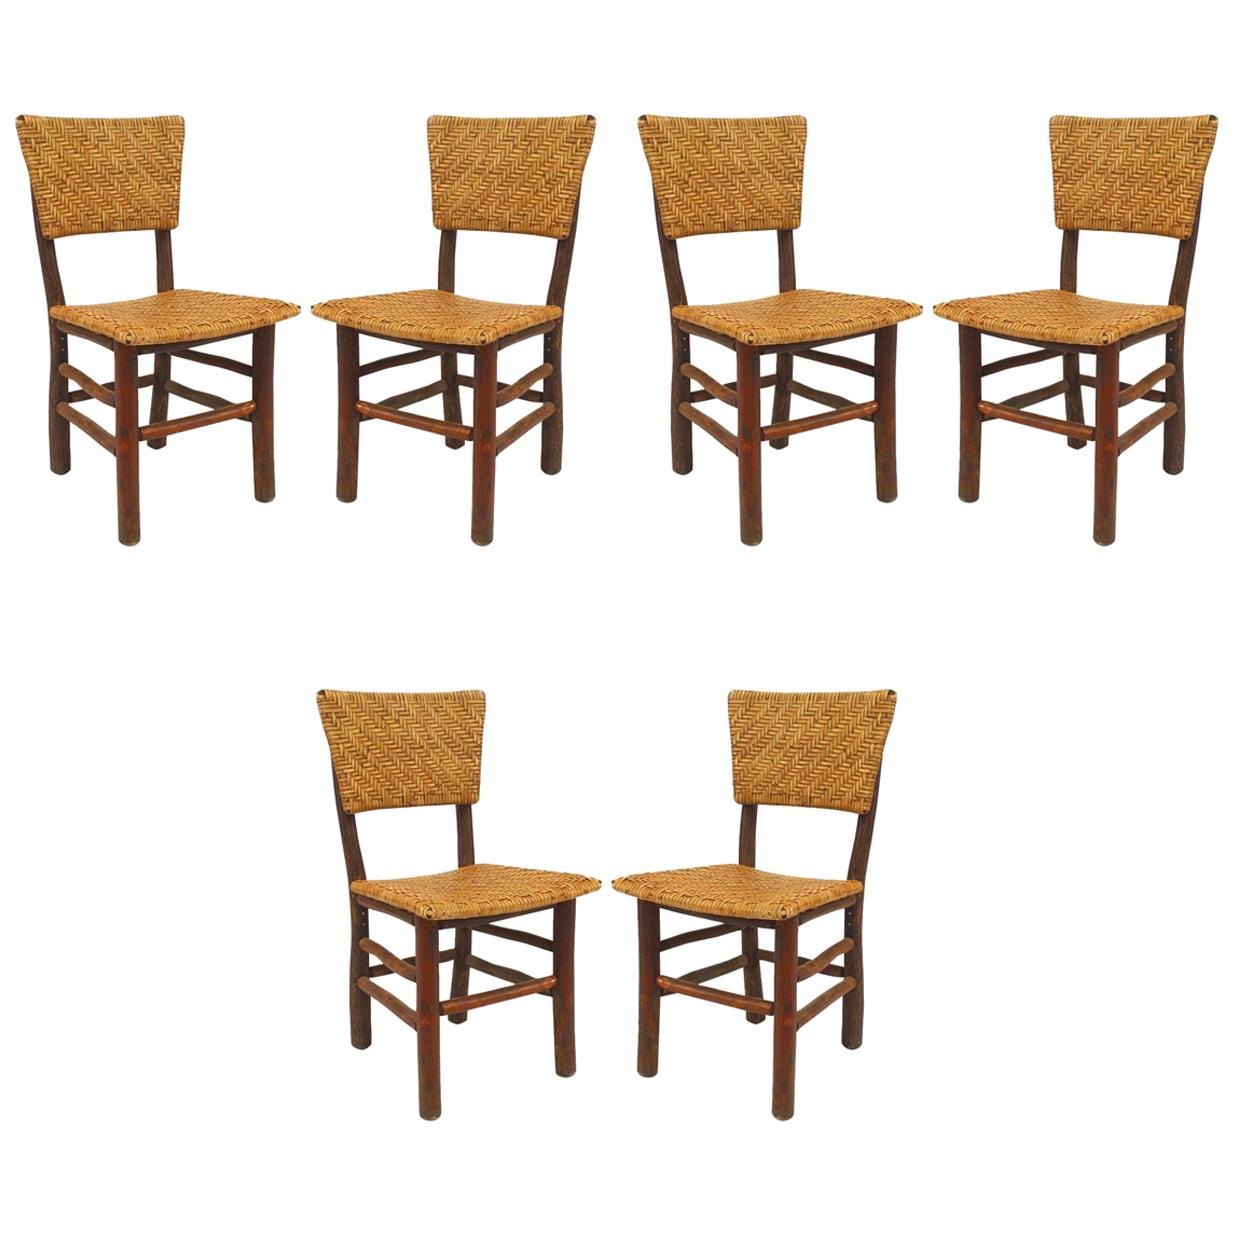 Set of 6 Rustic Old Hickory Rattan Side Chairs For Sale